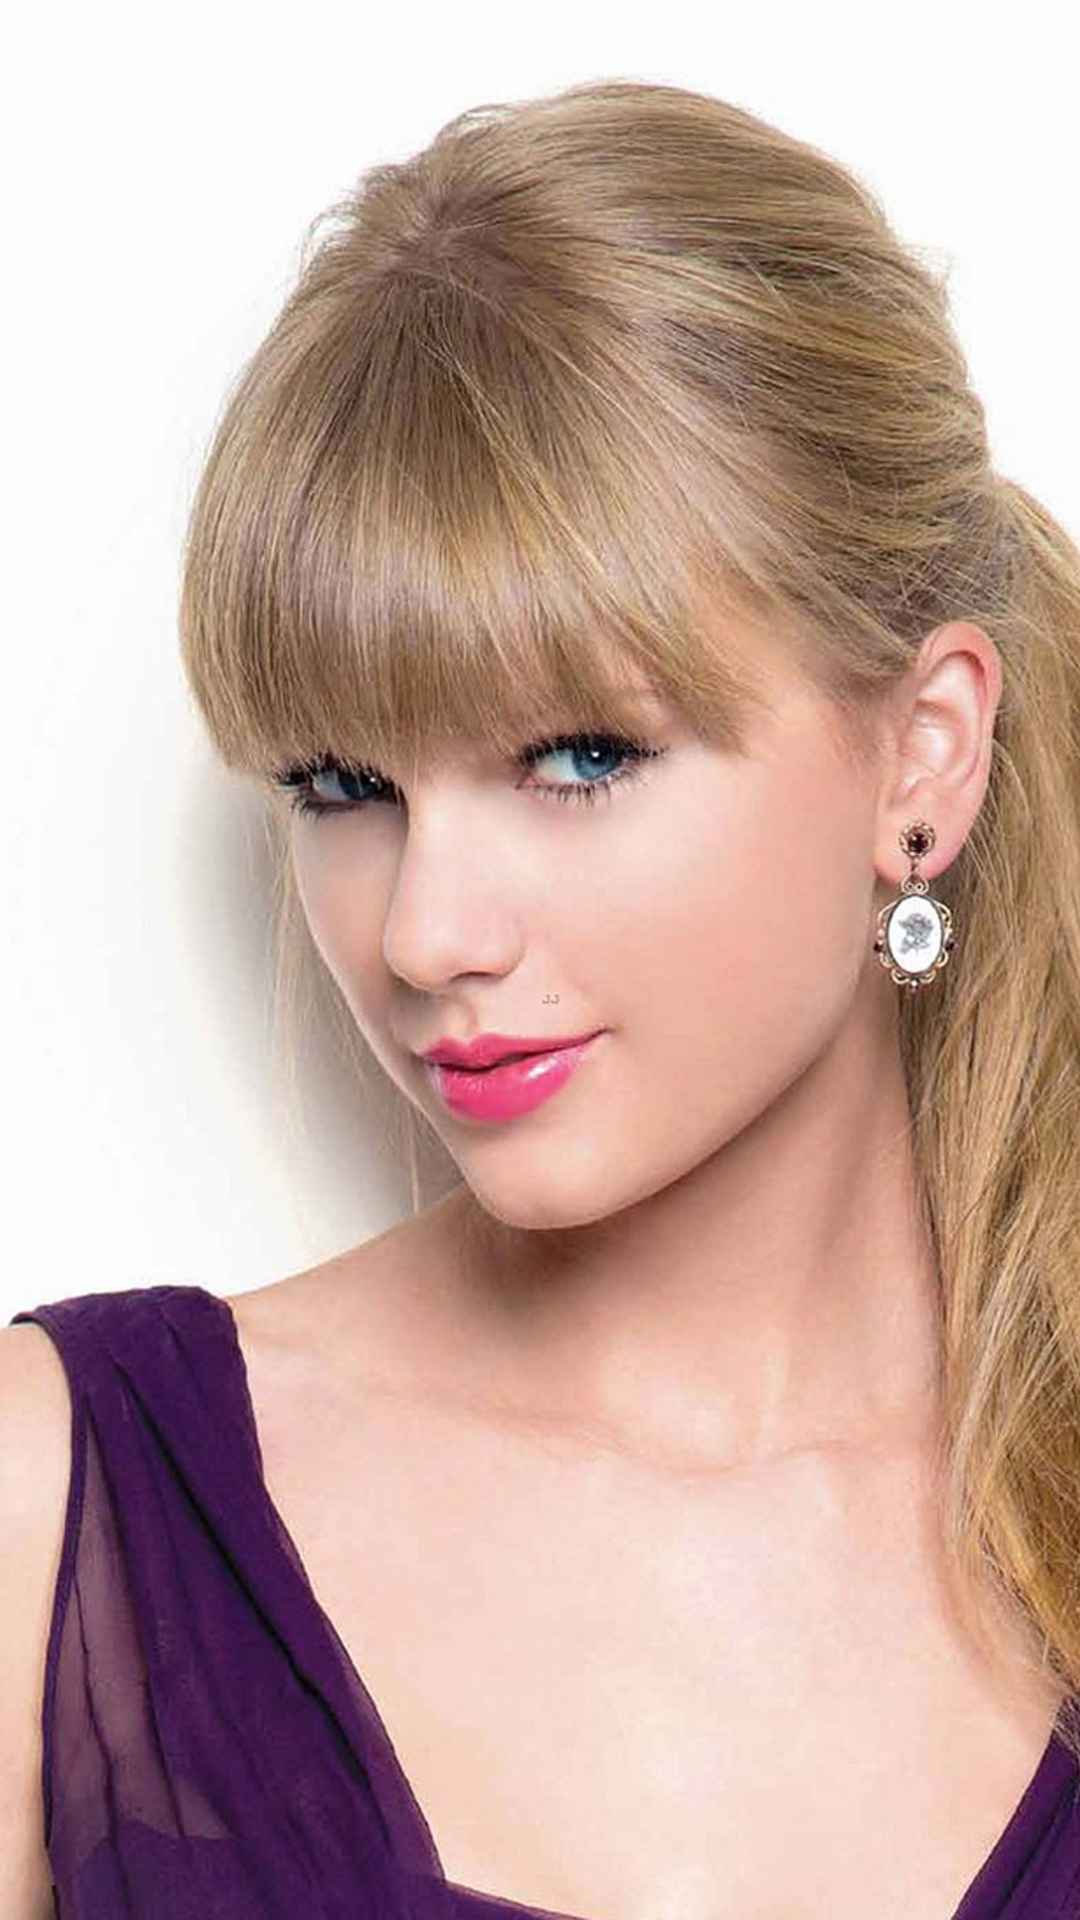 Taylor Swift Sweet HD Wallpaper For Your iPhone